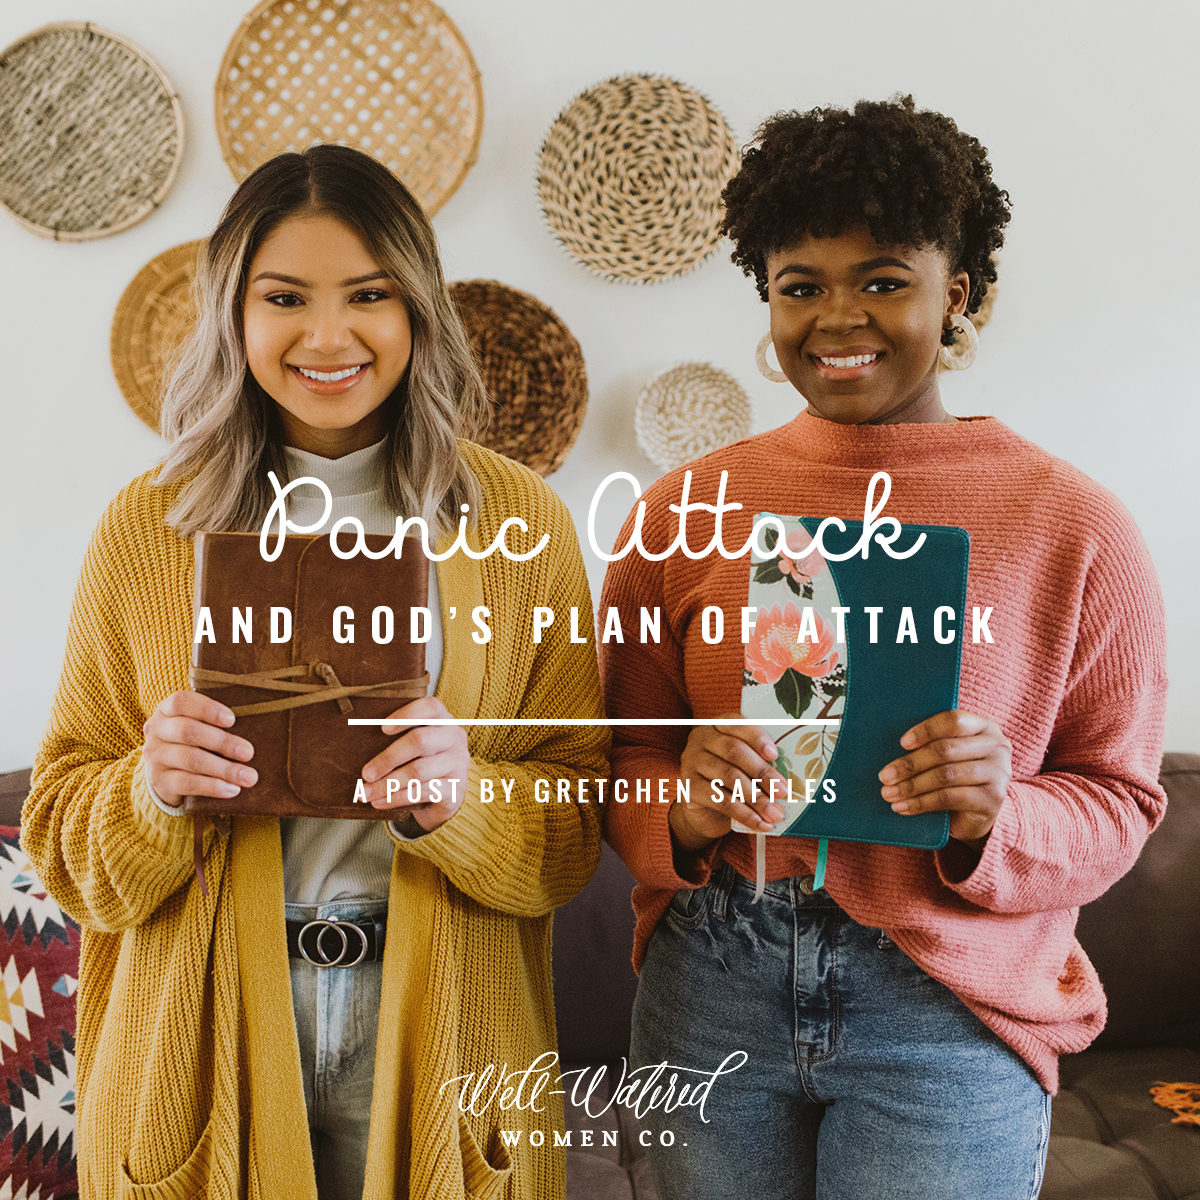 Well-Watered Women Blog-Panic Attack and God's Plan of Attack